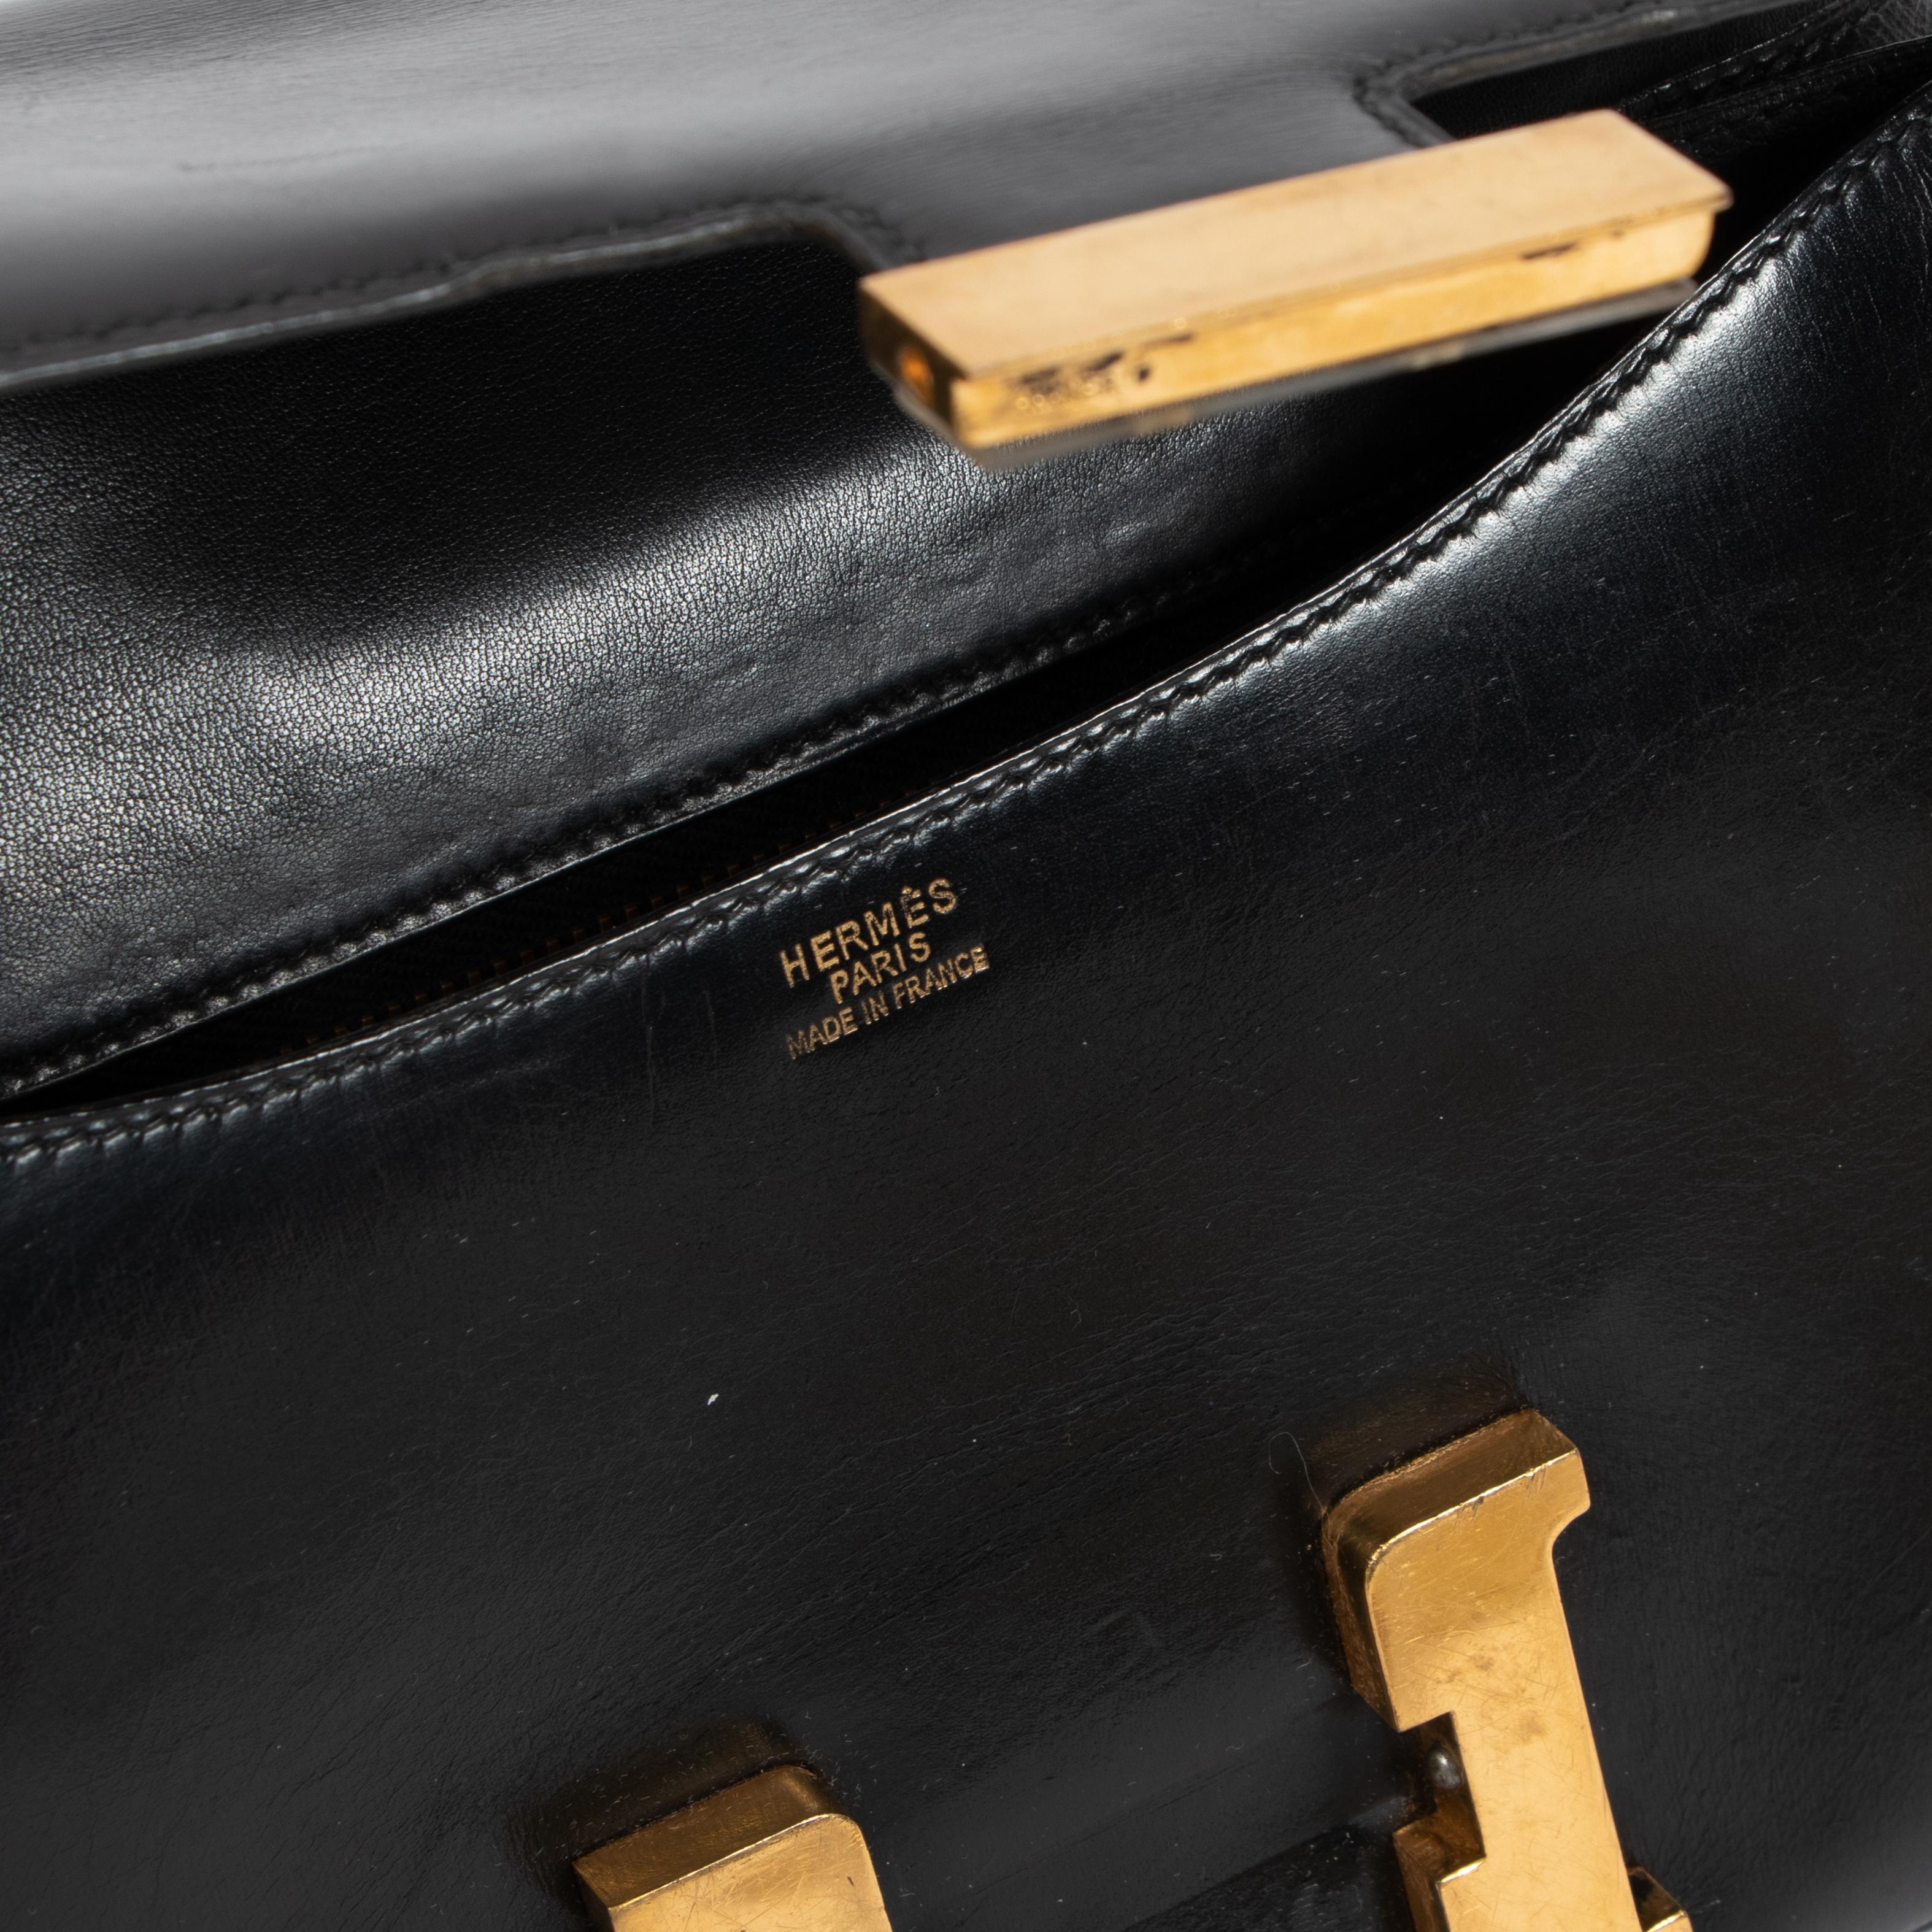 Hermès Vintage Constance 23 Black Box Gold Hardware

In 1967, the Executive Chairman of Hermès, Jean-Louis Dumas, asked a designer to create a bag for Hermès. The young woman, who was pregnant at the time, naturally named the bag after her new